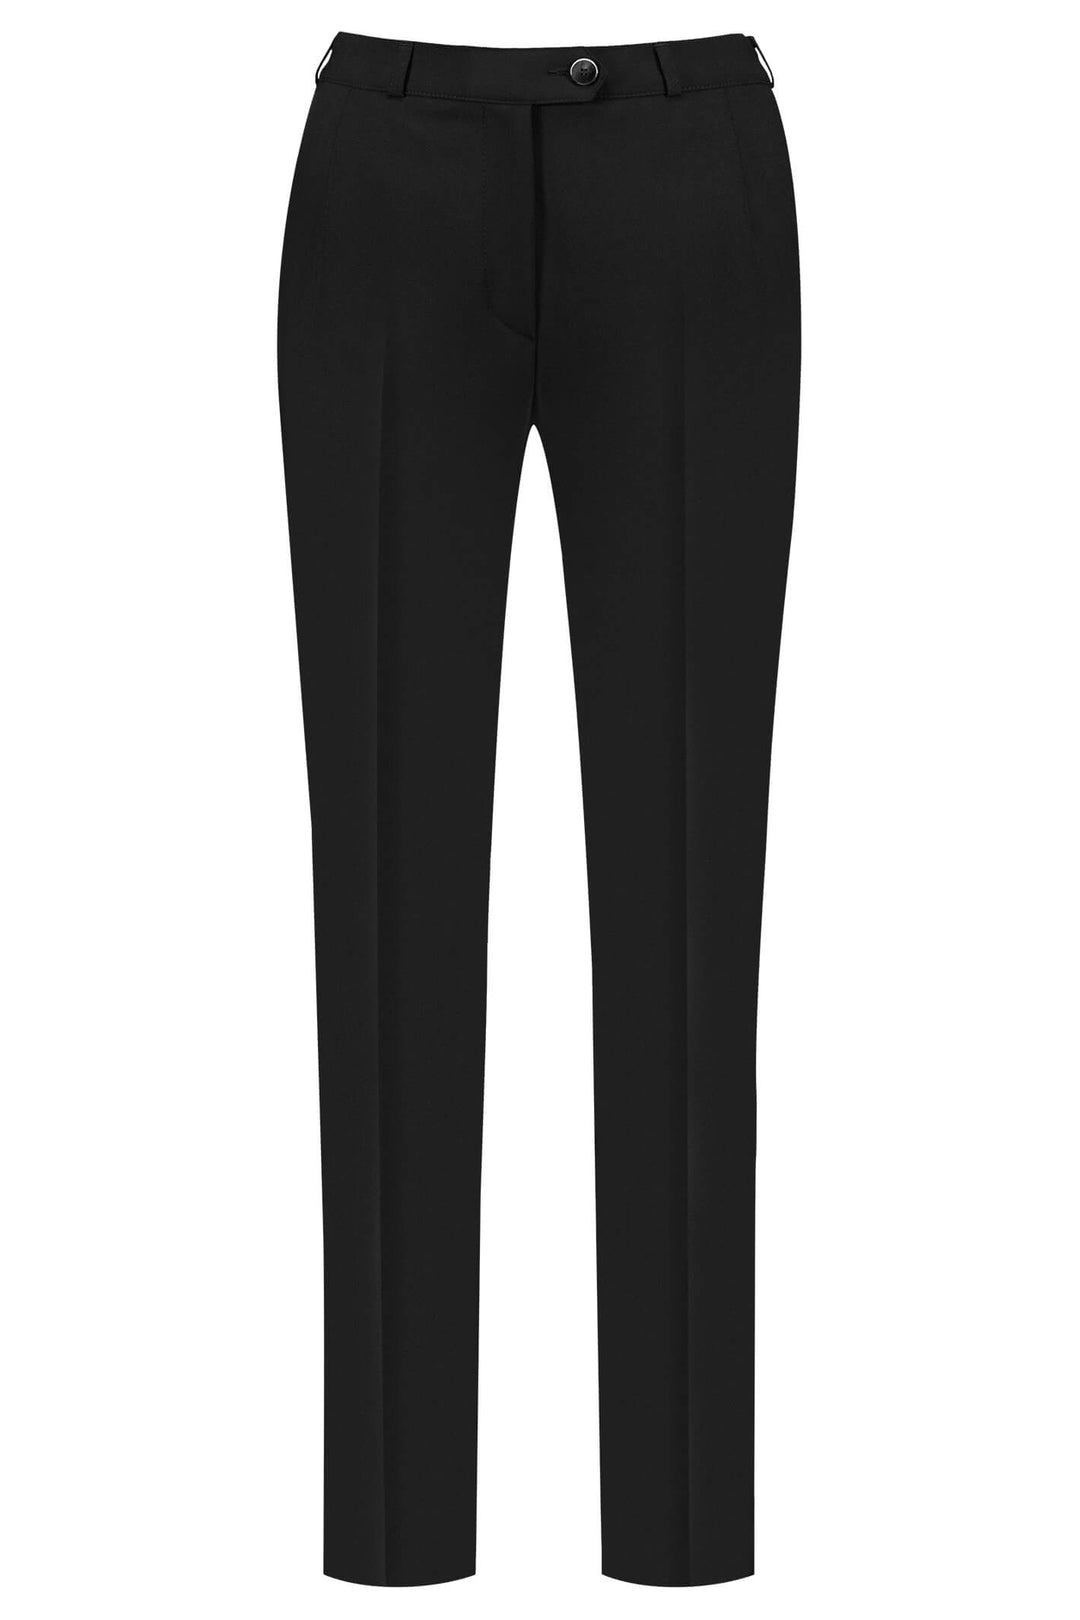 Zerres Anika 1303-983 99 Black Wool Blend Stretch City Trousers - Shirley Allum Boutique